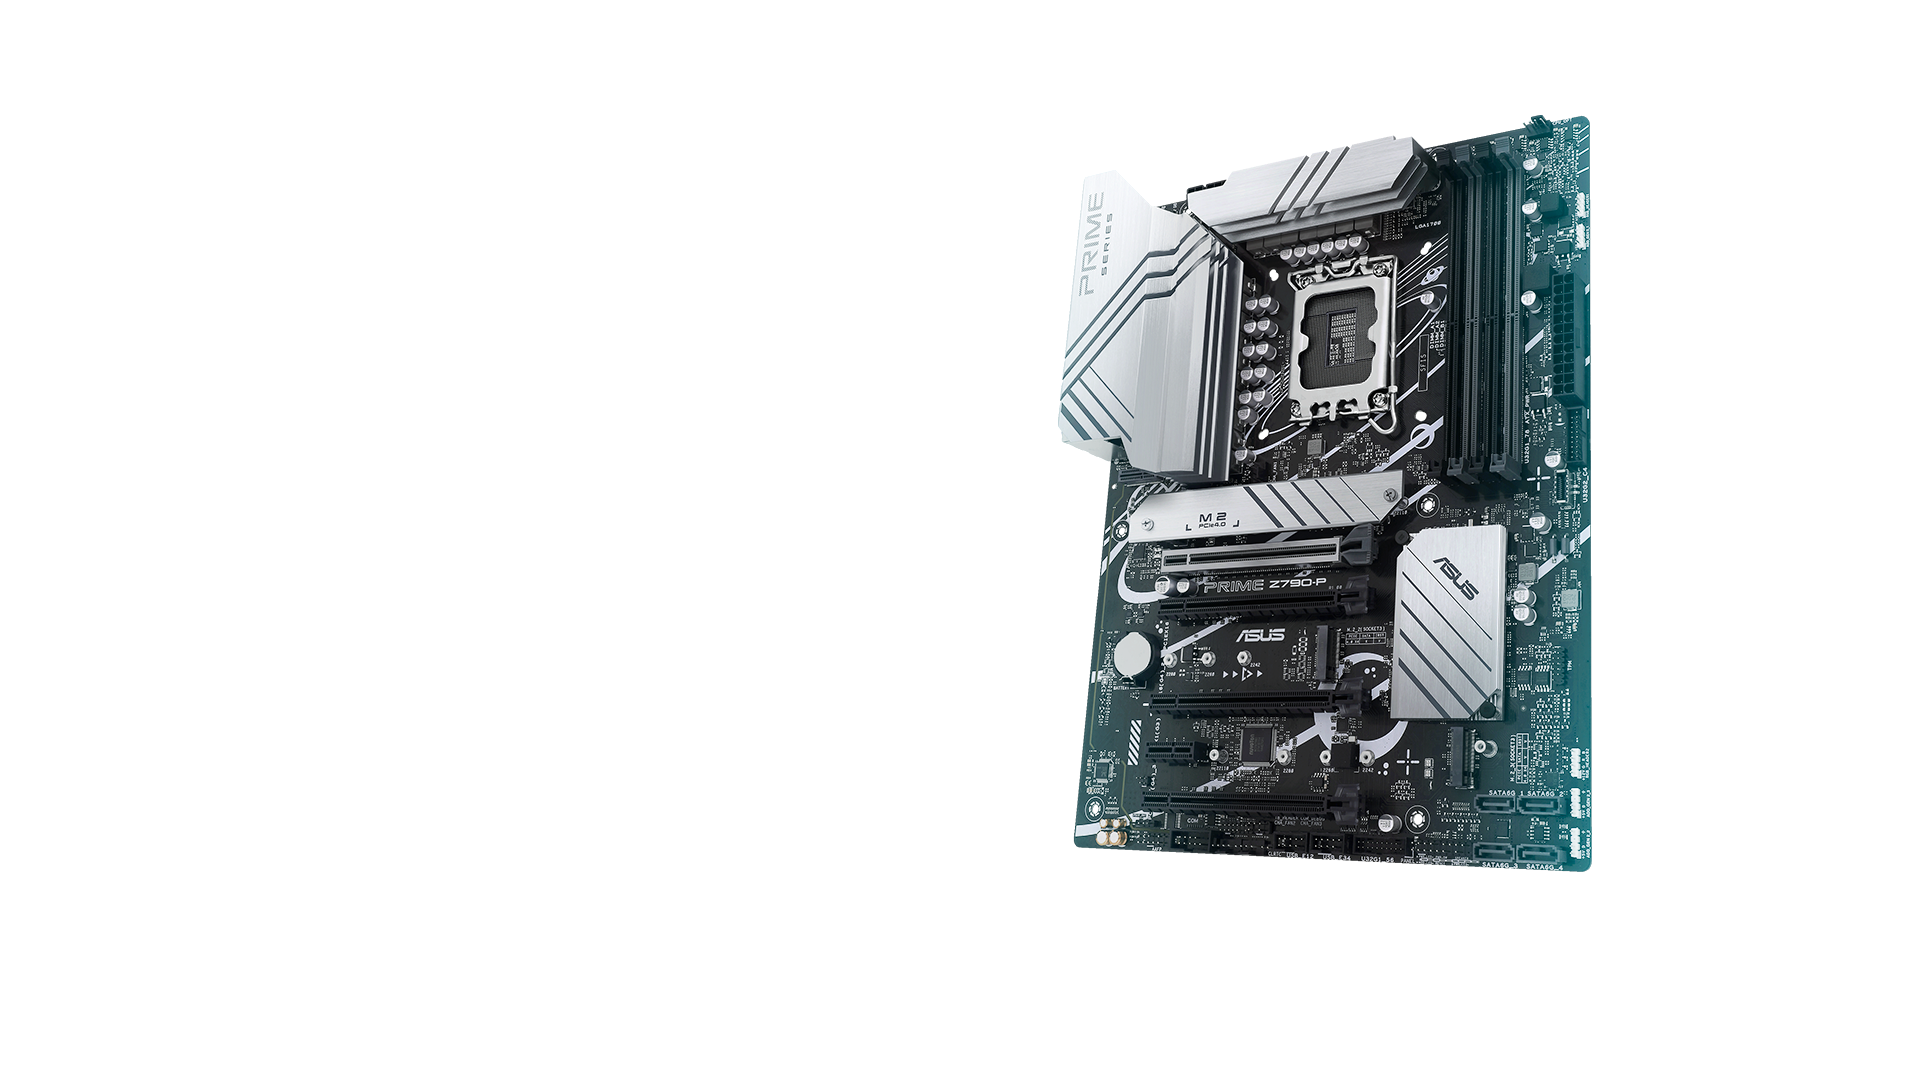 PRIME Z790-P provides users and PC DIY builders a range of performance tuning options via intuitive software and firmware features